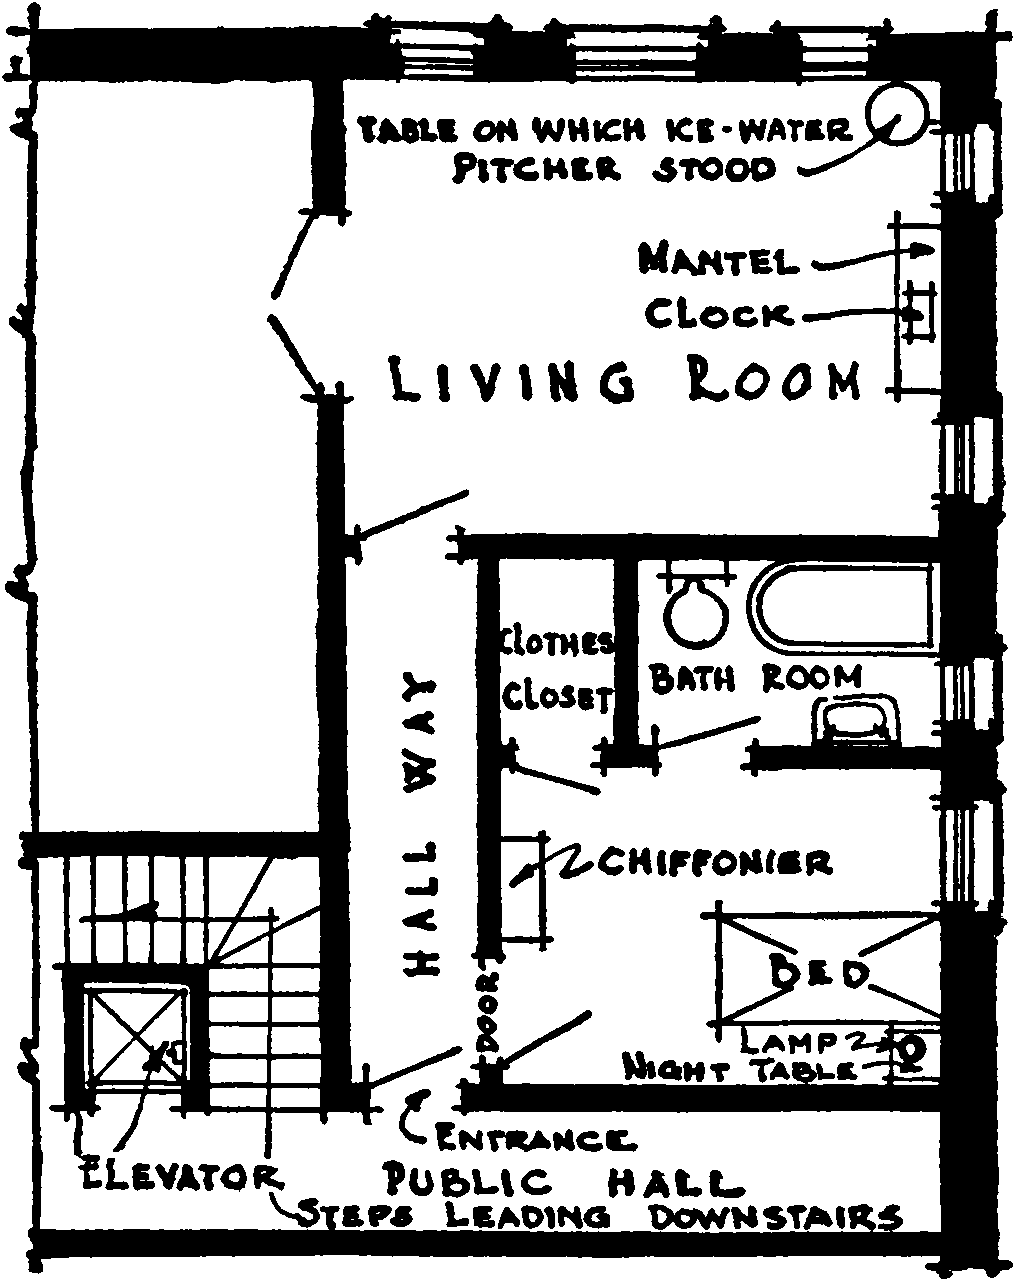 The floor plan of an apartment.      The front door opens into a hallway that leads past a bedroom      door into a living room. In the living room is a clock on the      fireplace mantel, and a round table in the far corner. In the      bedroom is a bed facing the door. A night table stands by the      bed, and a lamp is on the night table.